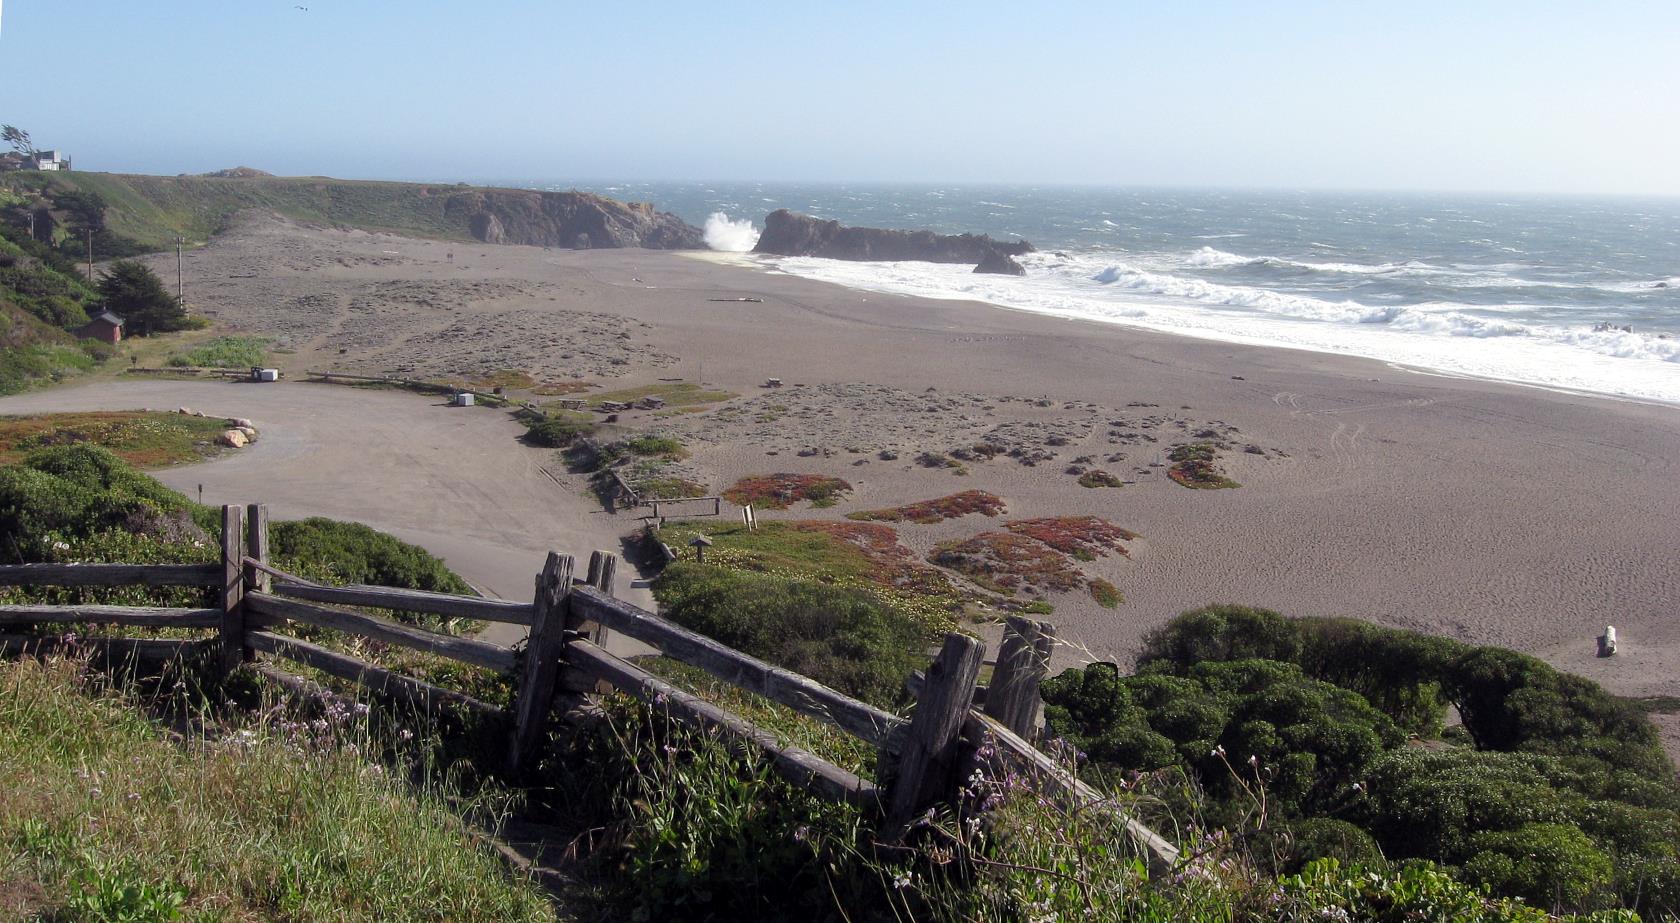 There are many small, inviting parks along the Sonoma Coast. It will not be empty in summer.